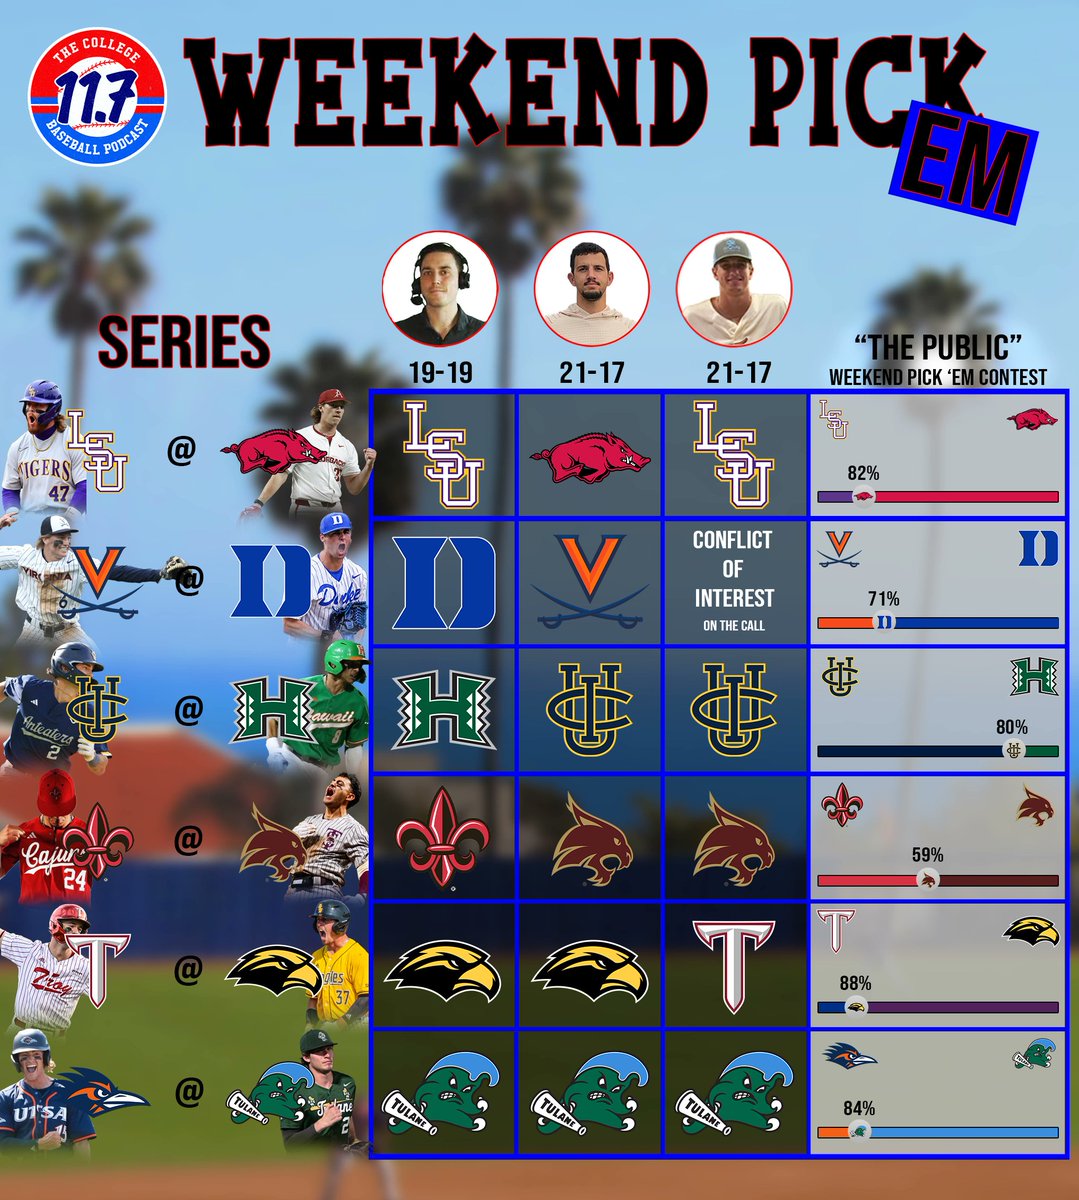 🚨WEEKEND PICK EM 🚨 Juggernaut fight at Baum Walker... feeding your late night college baseball addiction at Les Murakami with a loaded Irvine coming to town. And of course, some big time Fun Belt Action. LFG